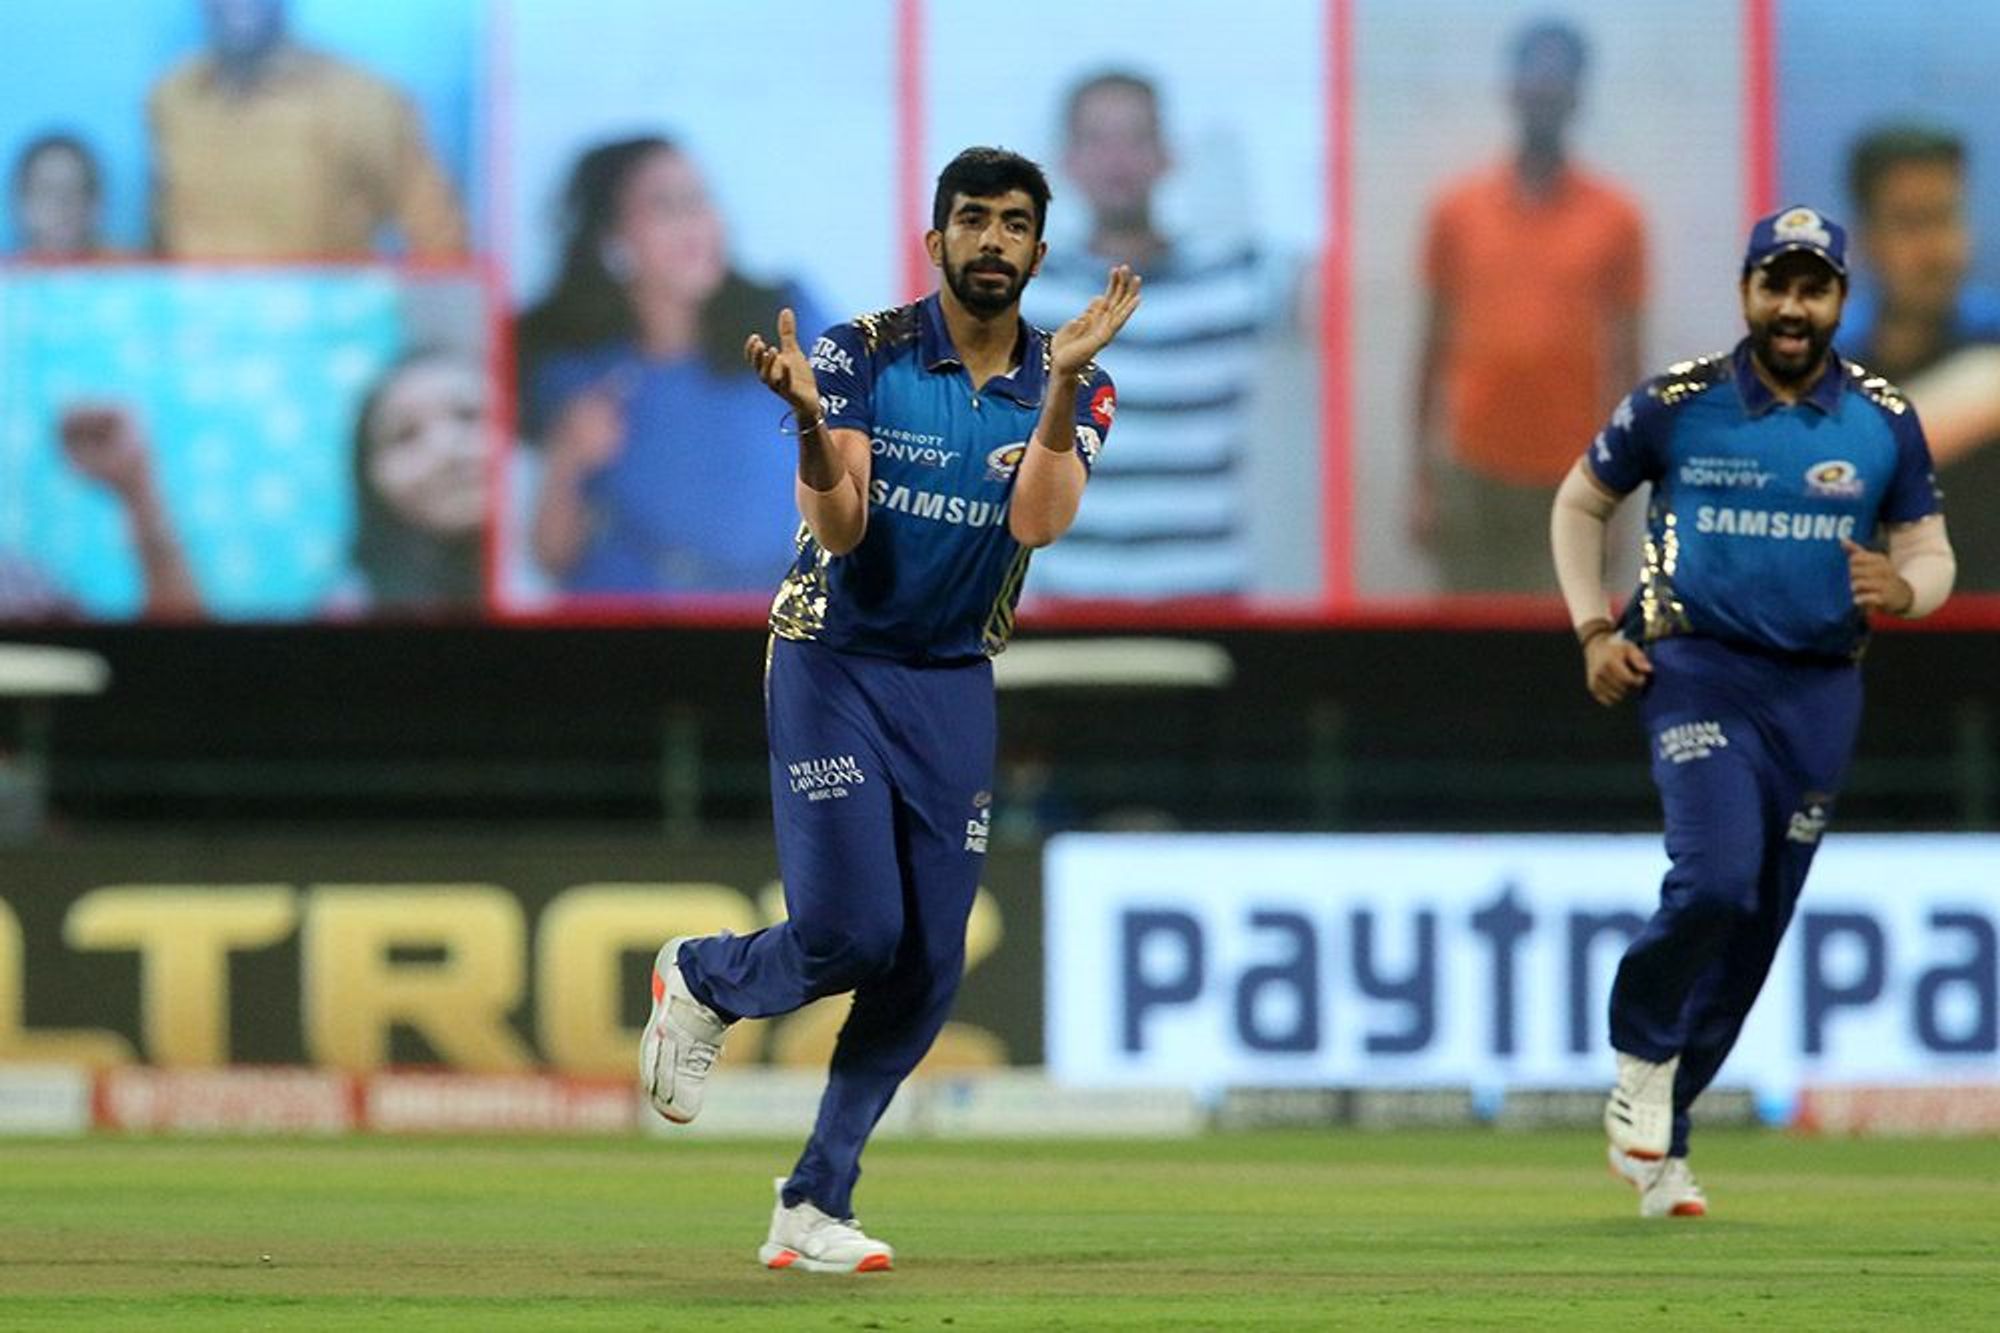 Rohit Sharma gave me the freedom to do what I wanted at Mumbai Indians, reveals Jasprit Bumrah